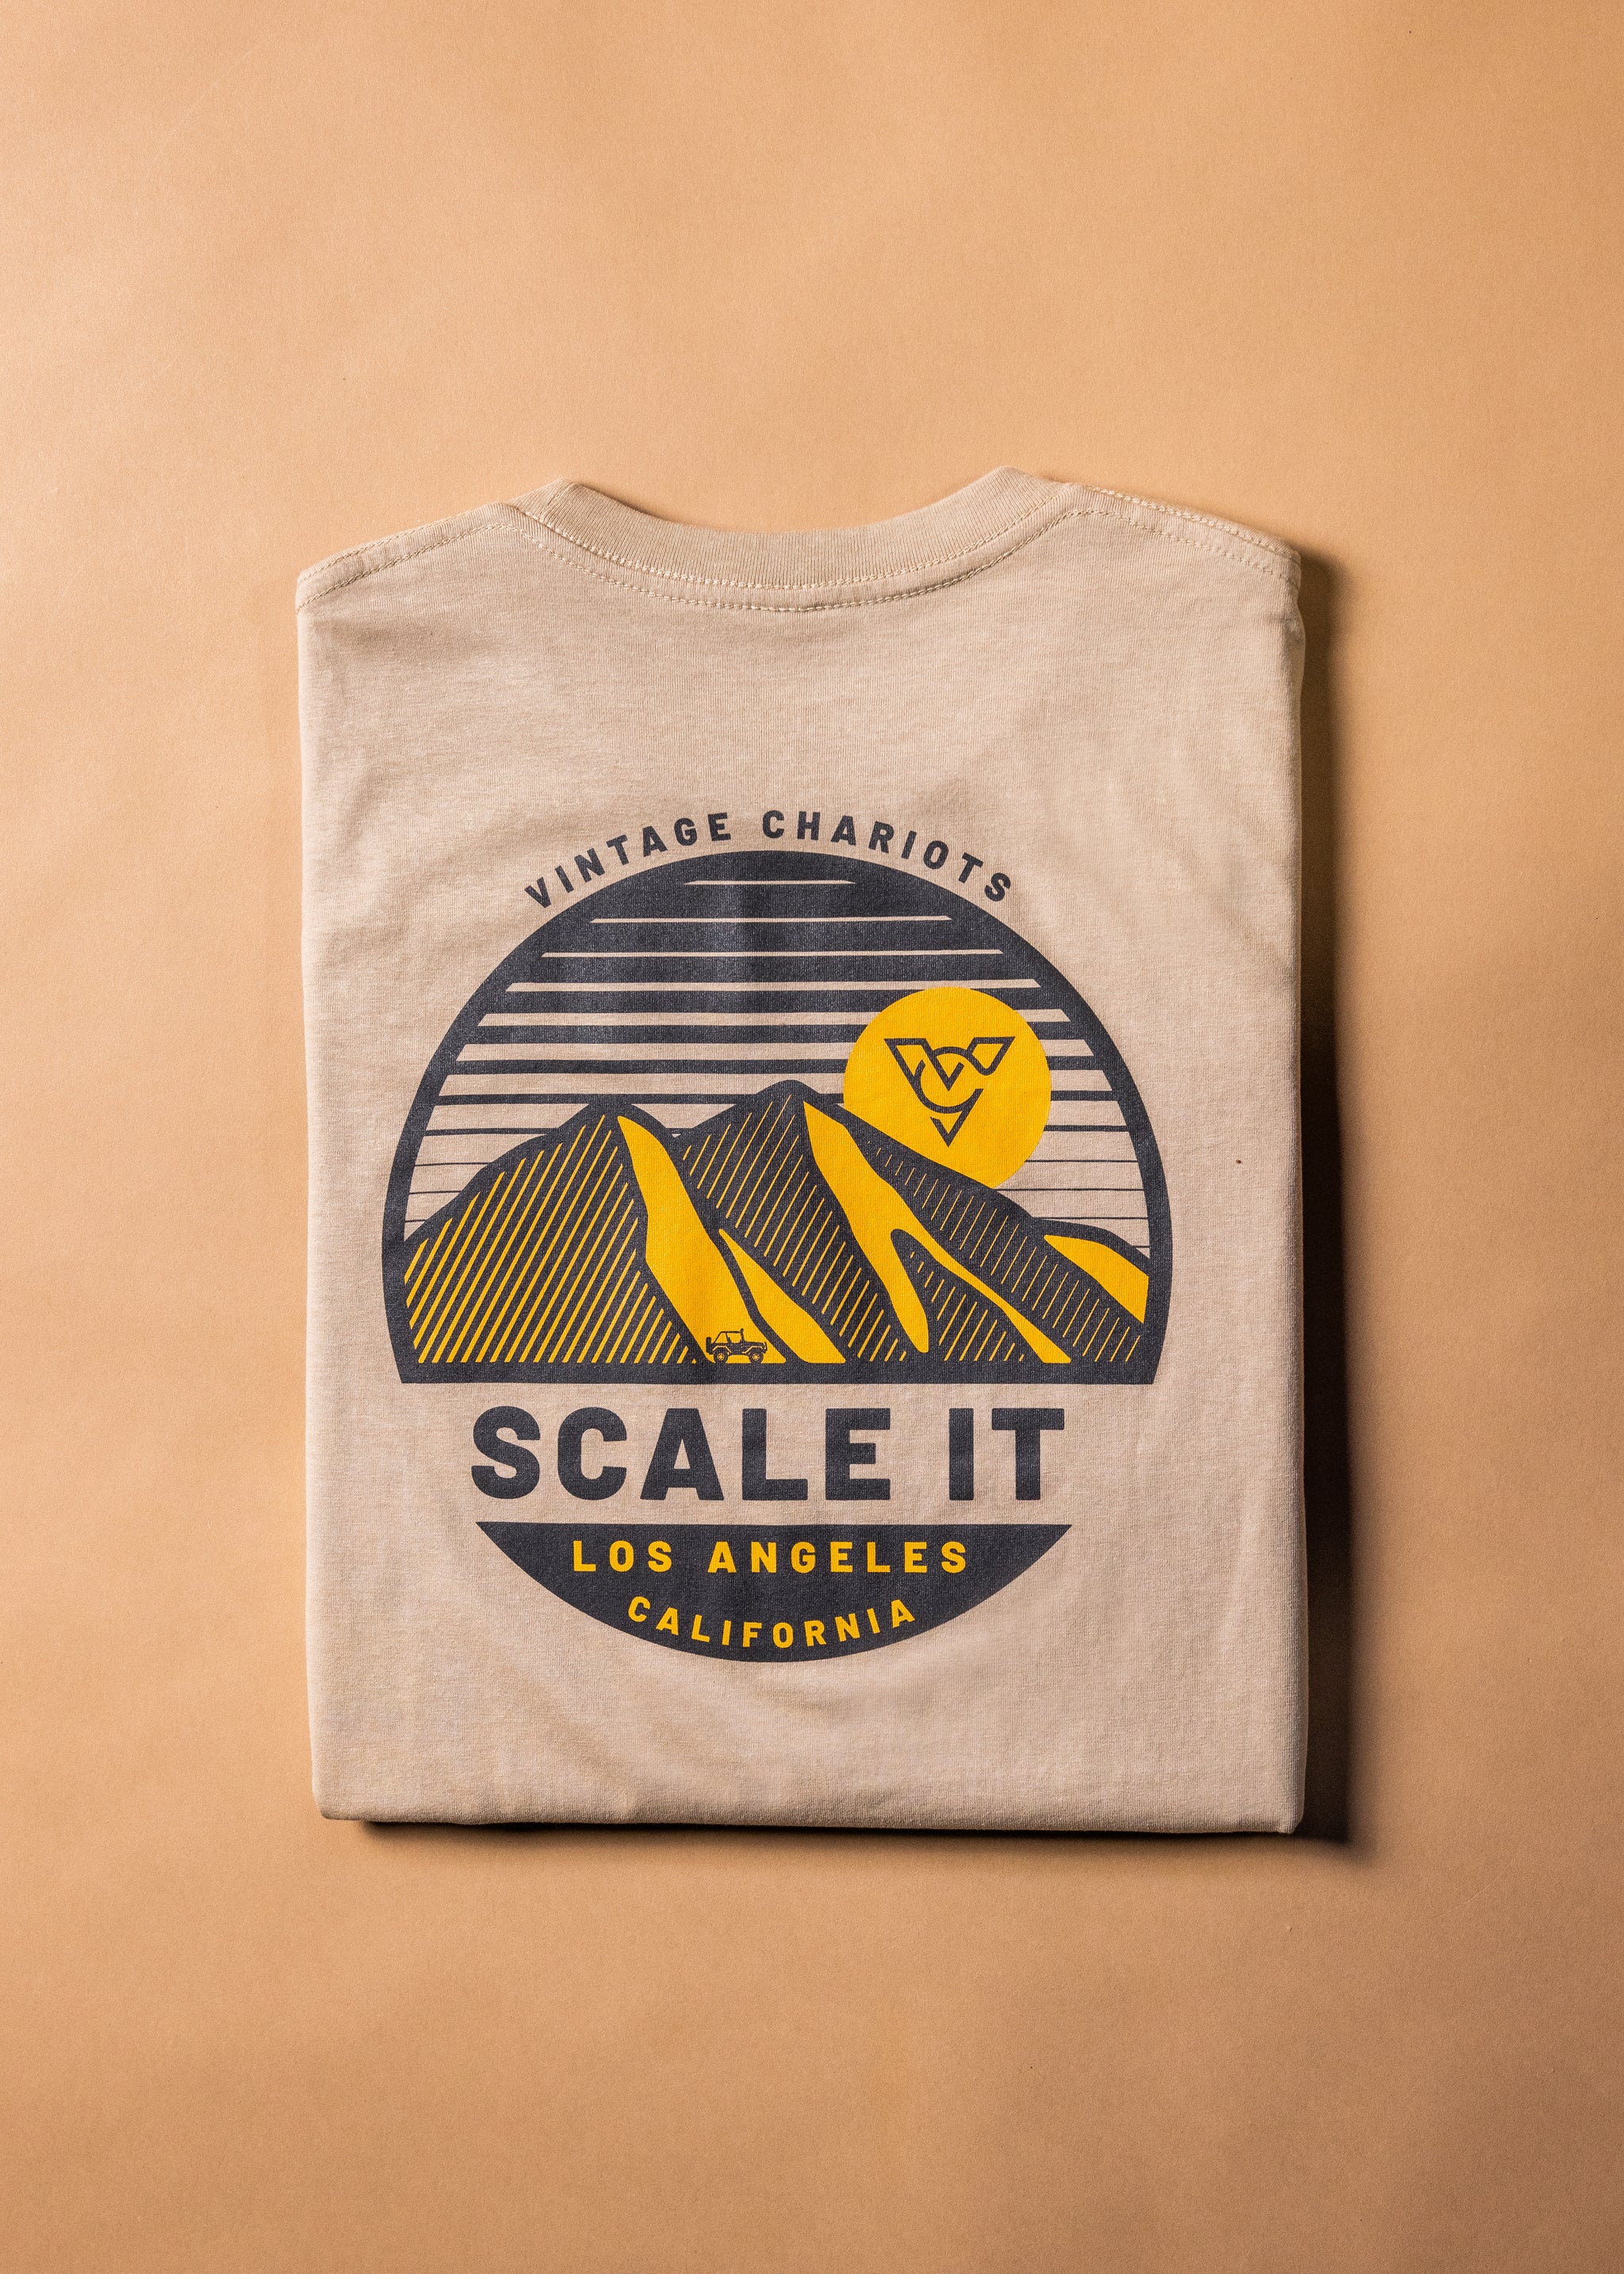 SCALE IT TEE (Sand)